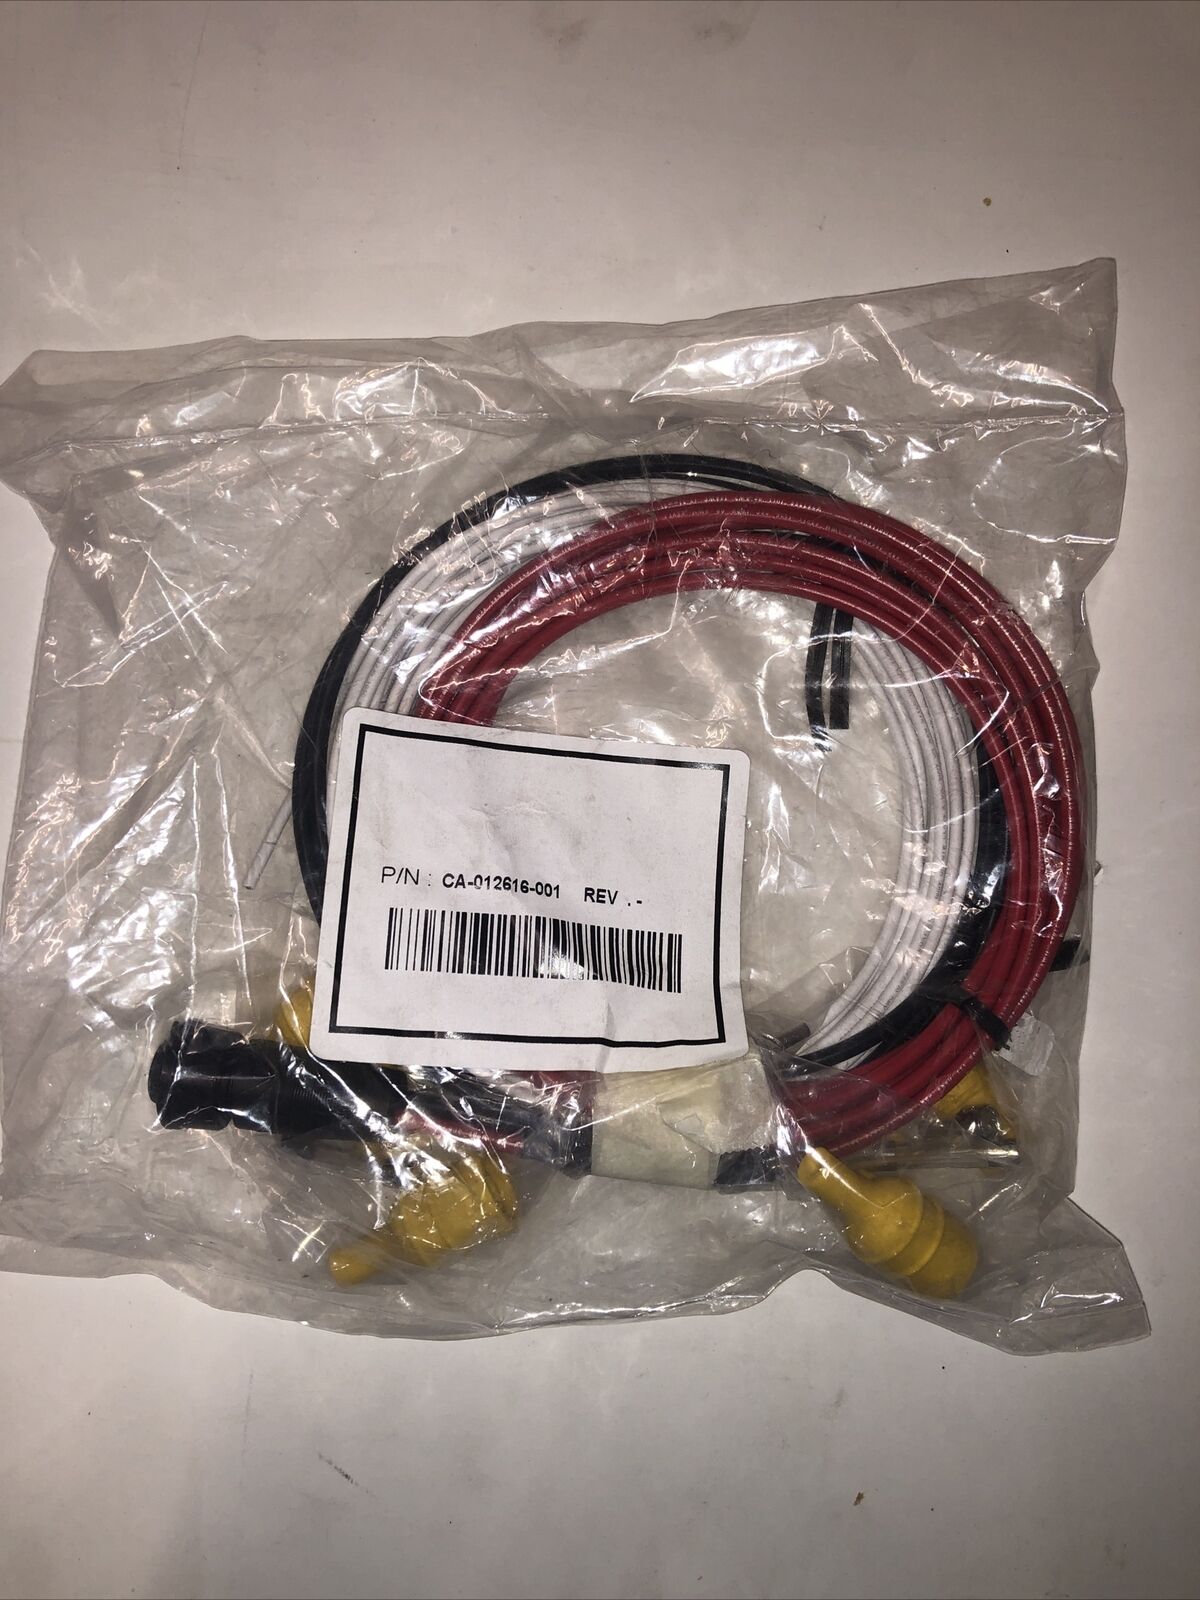 Harris Power Cable Ca-012616-001